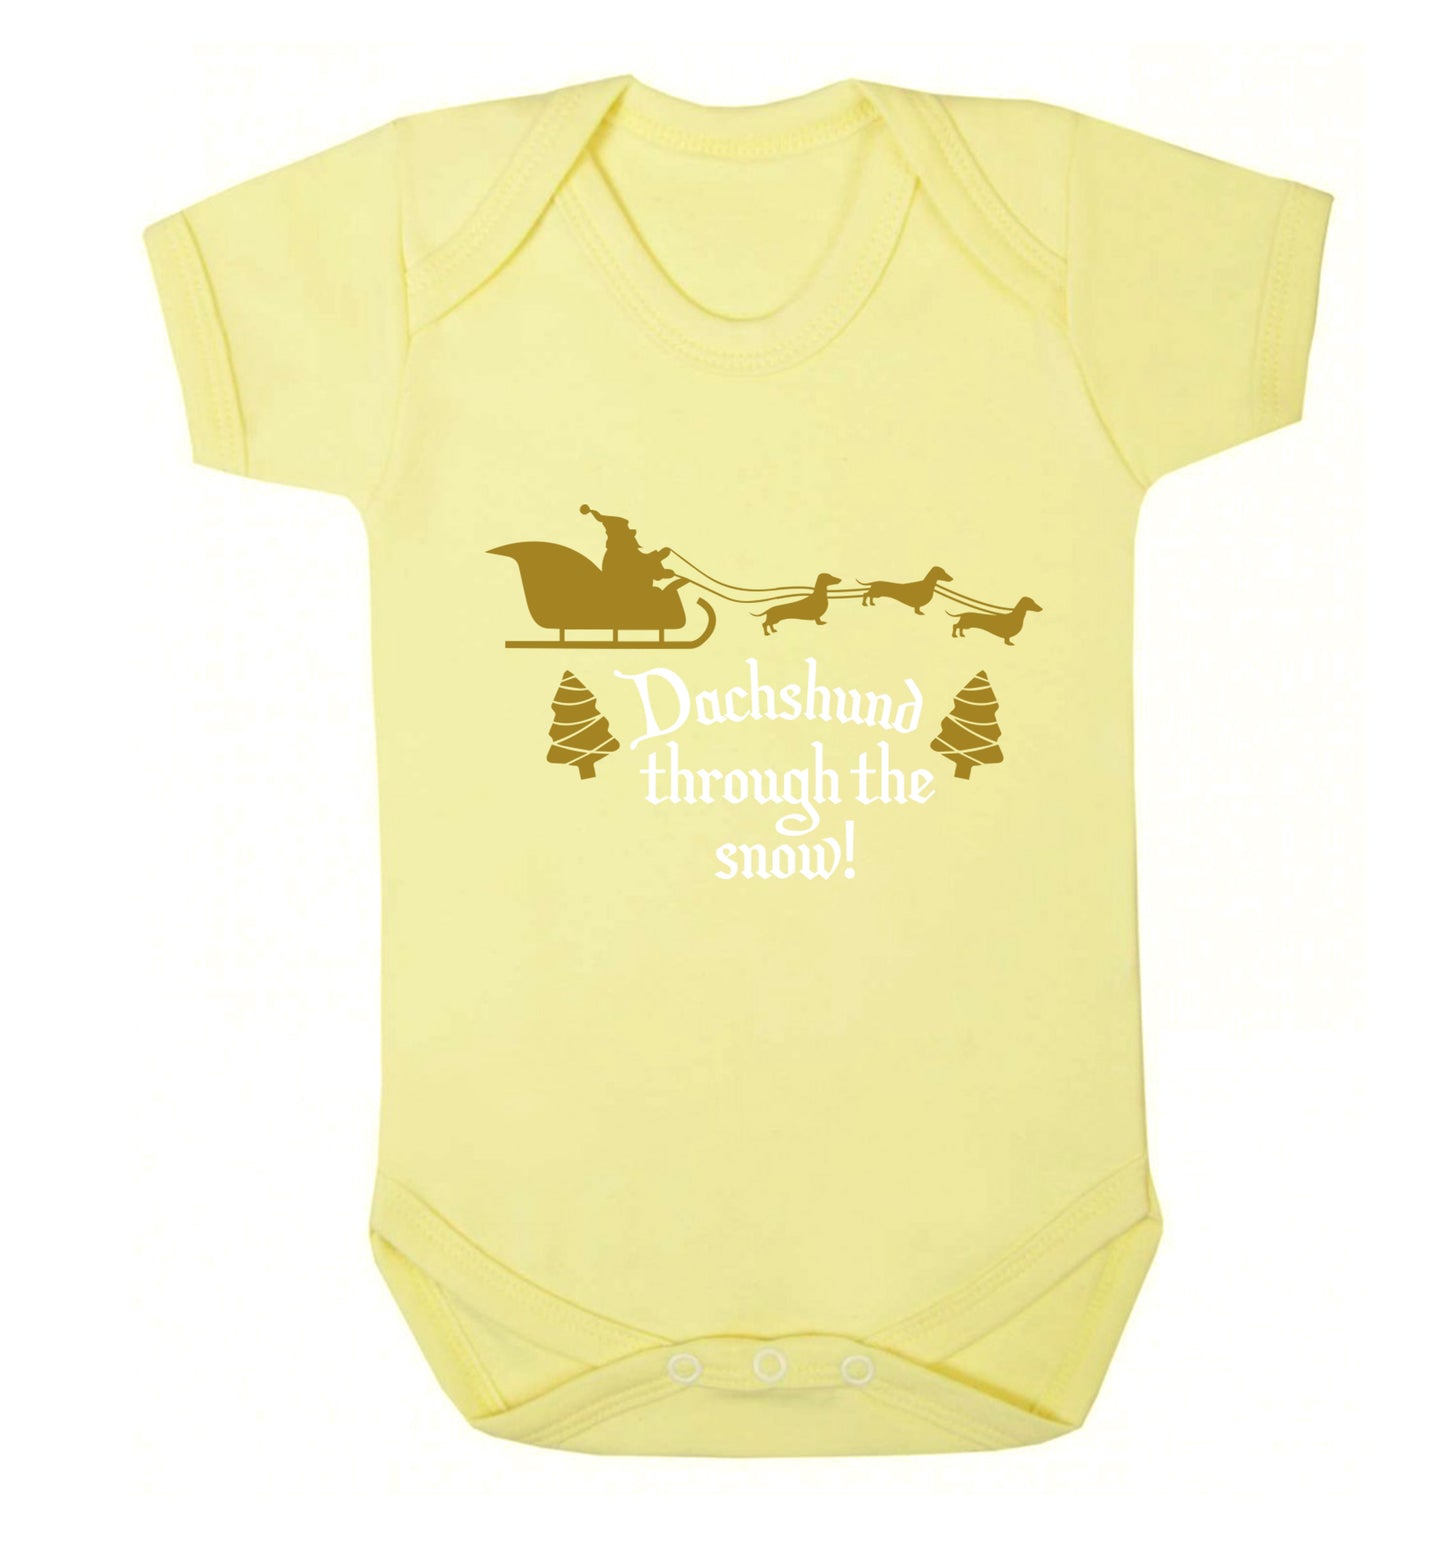 Dachshund through the snow Baby Vest pale yellow 18-24 months